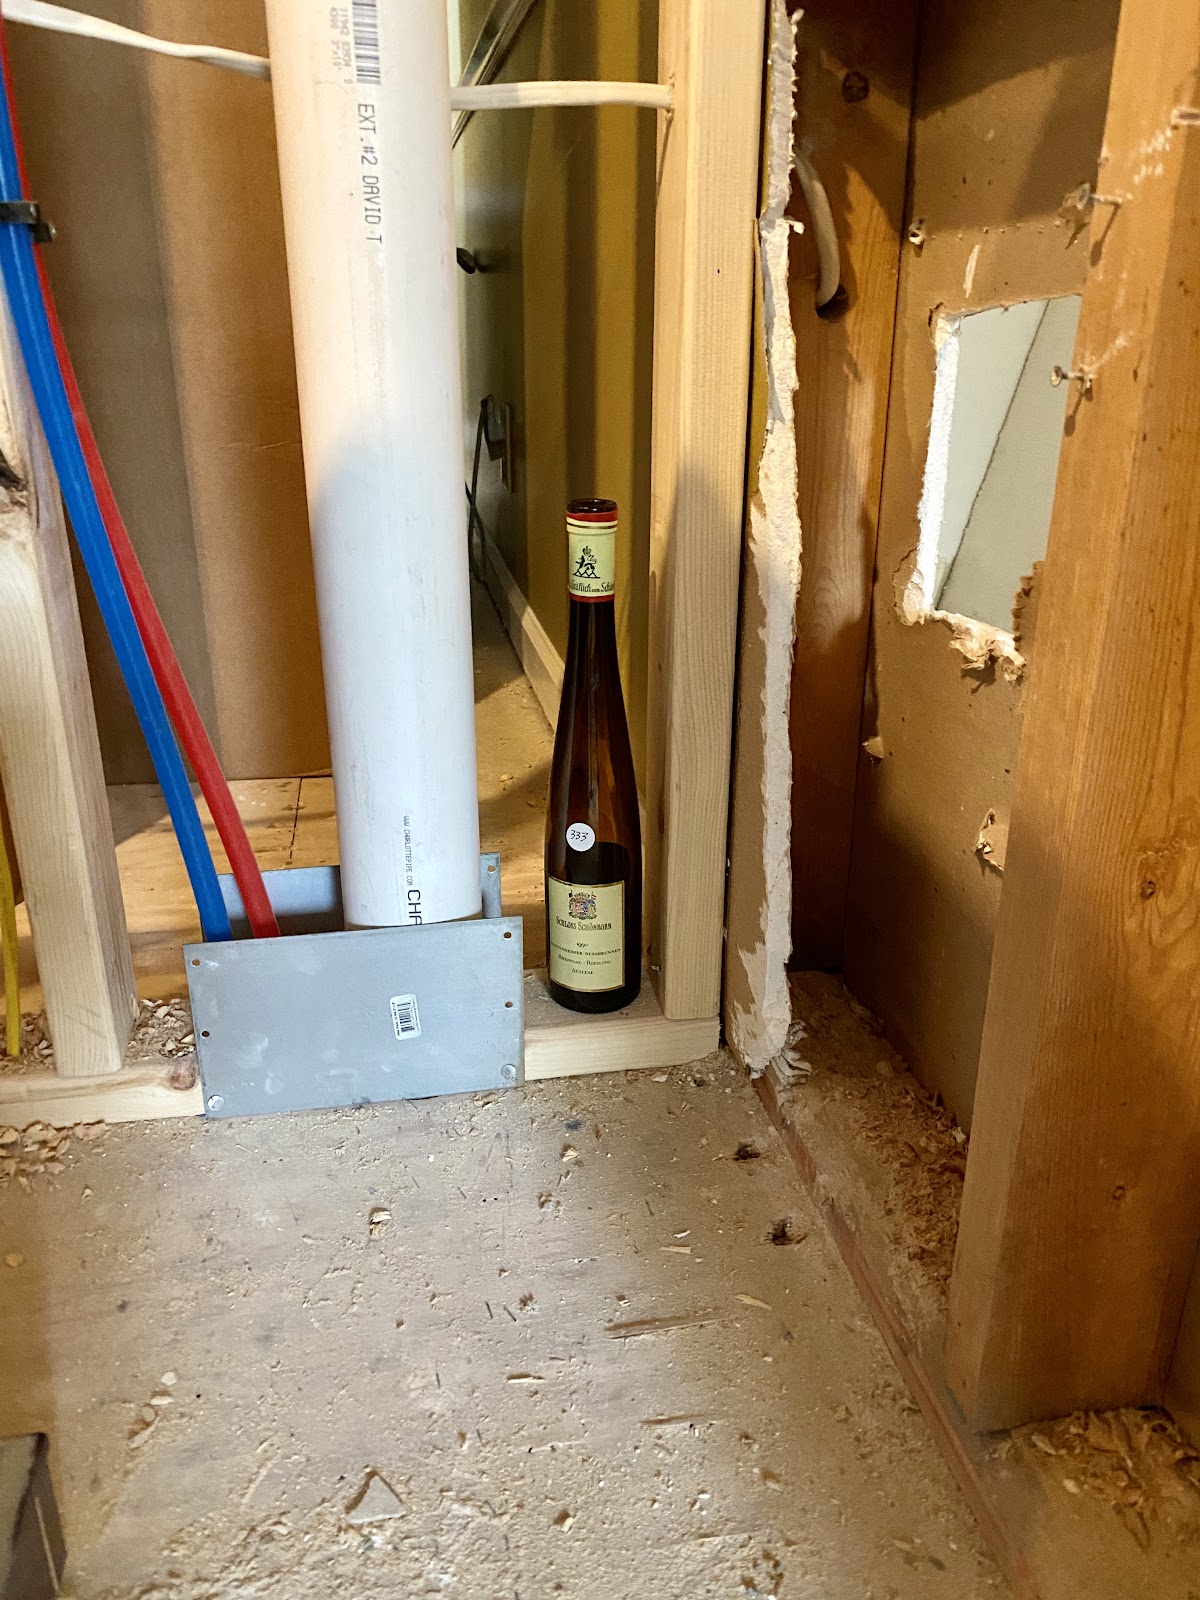 message in wine bottle placed in home studs for future generations to find!